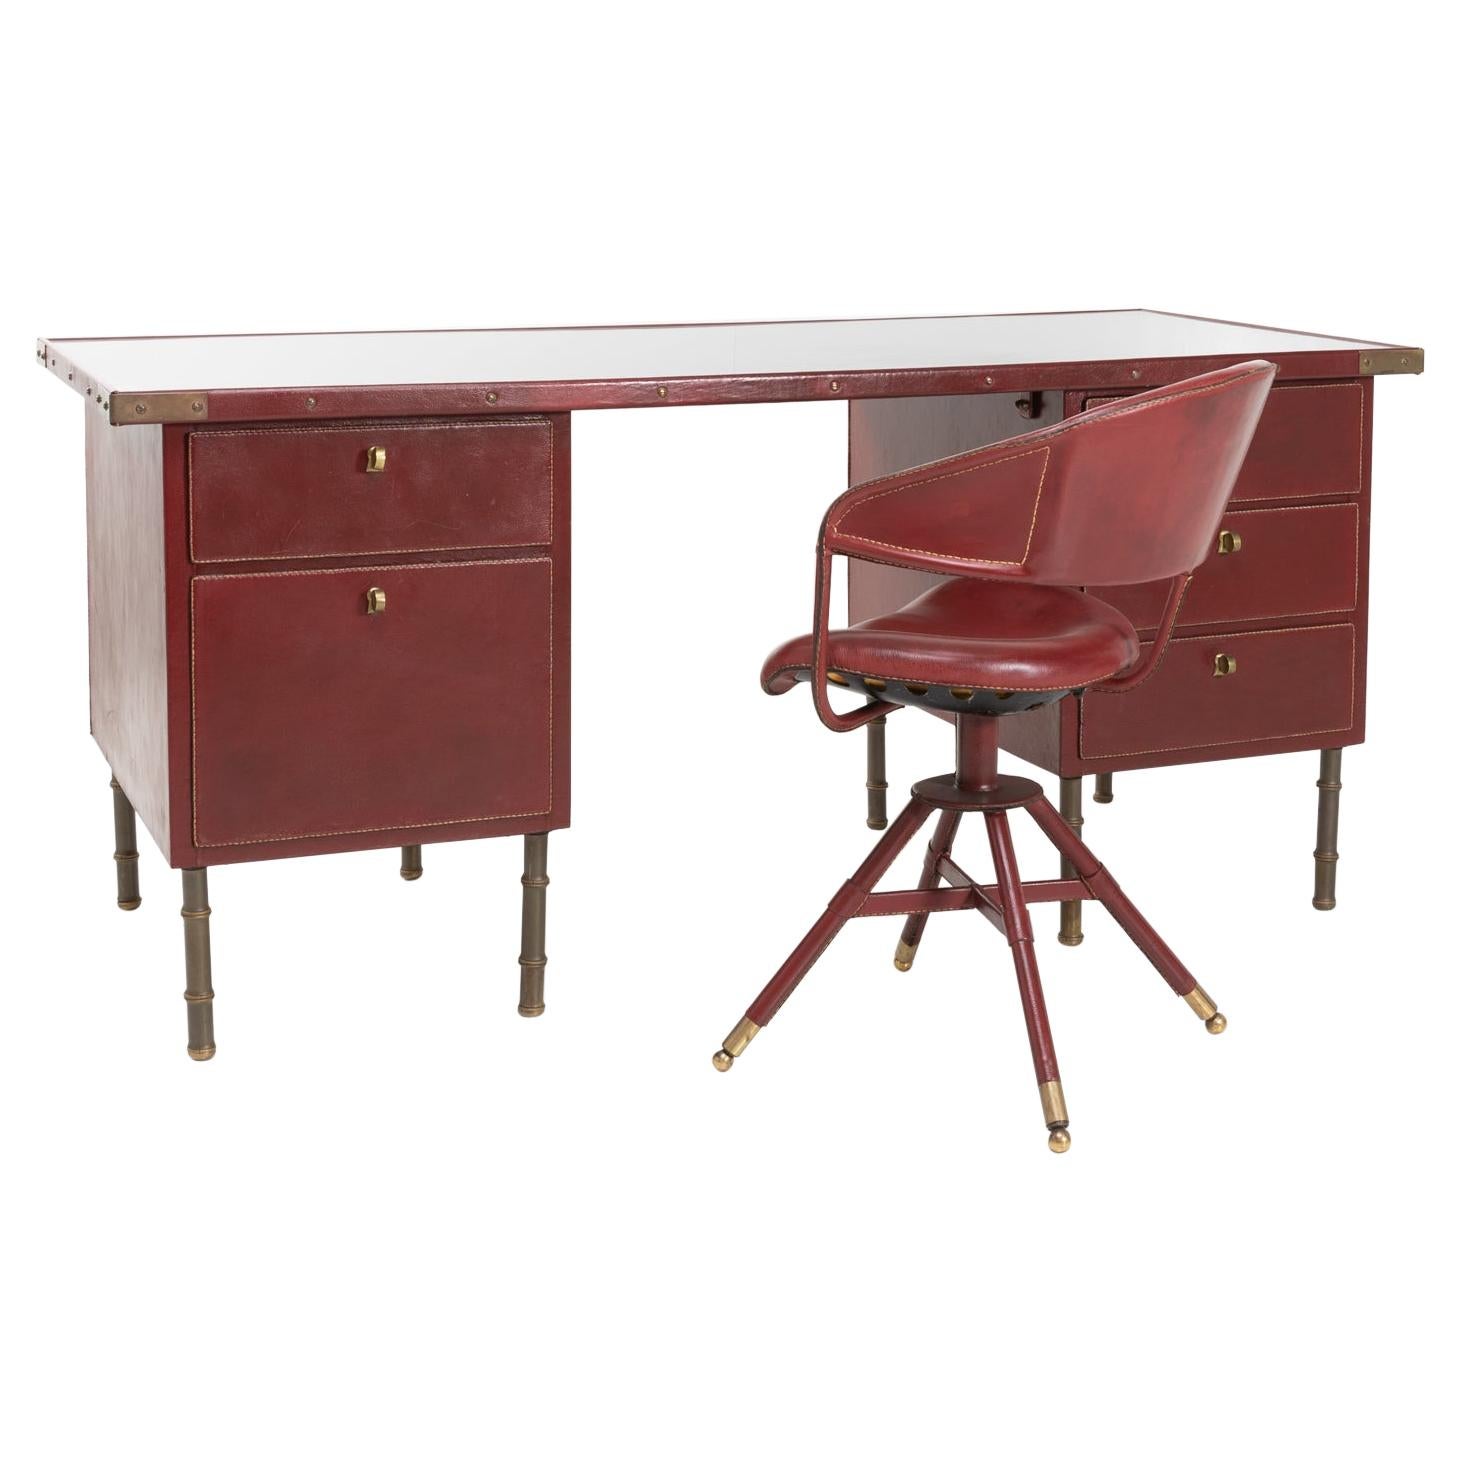 Coffered Desk with Its Matching Chair in the Shape of a Horse Saddle